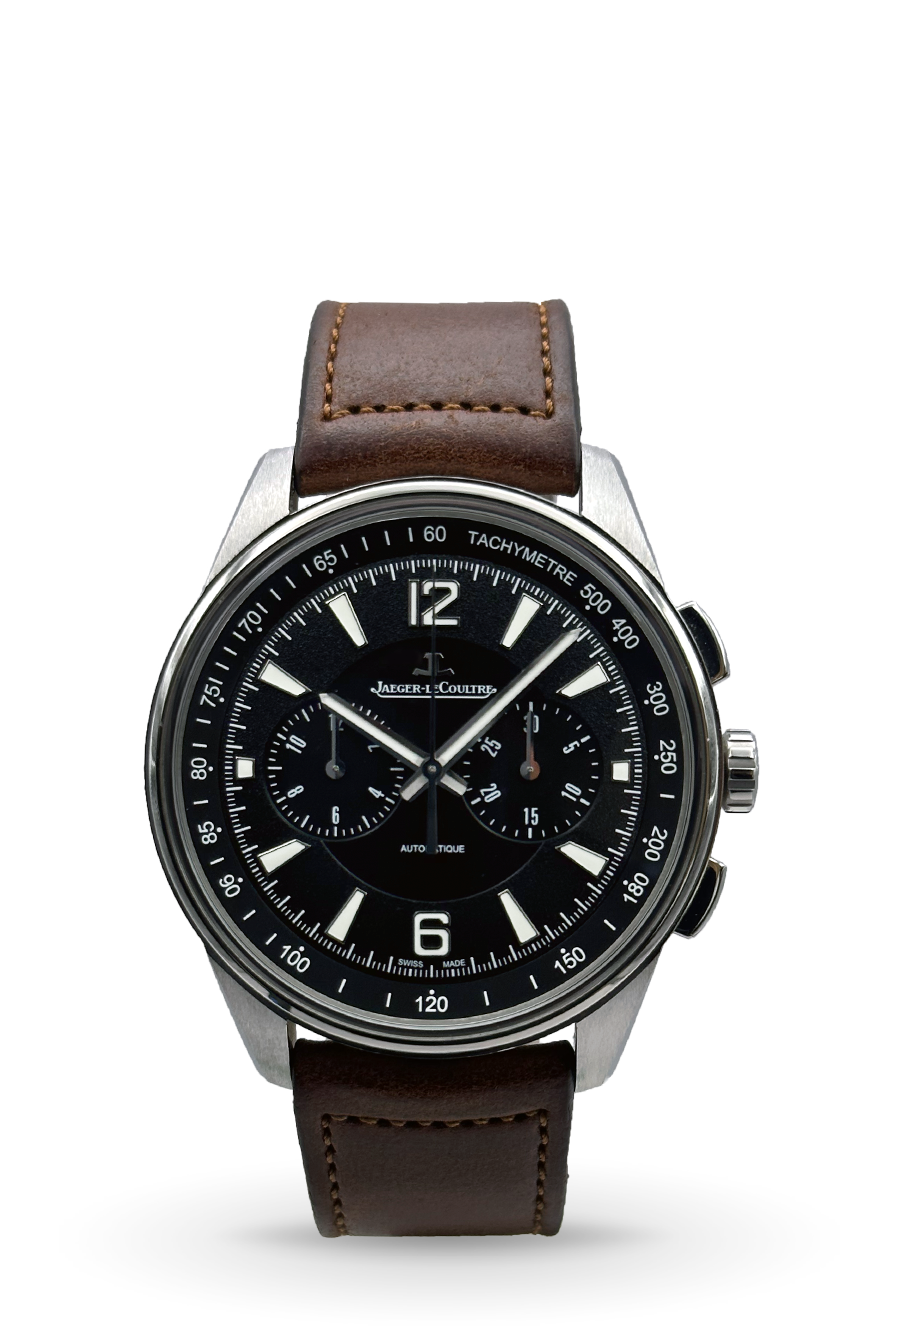 Pre-Owned Jaeger-LeCoultre Polaris Chronograph - Watches of Switzerland